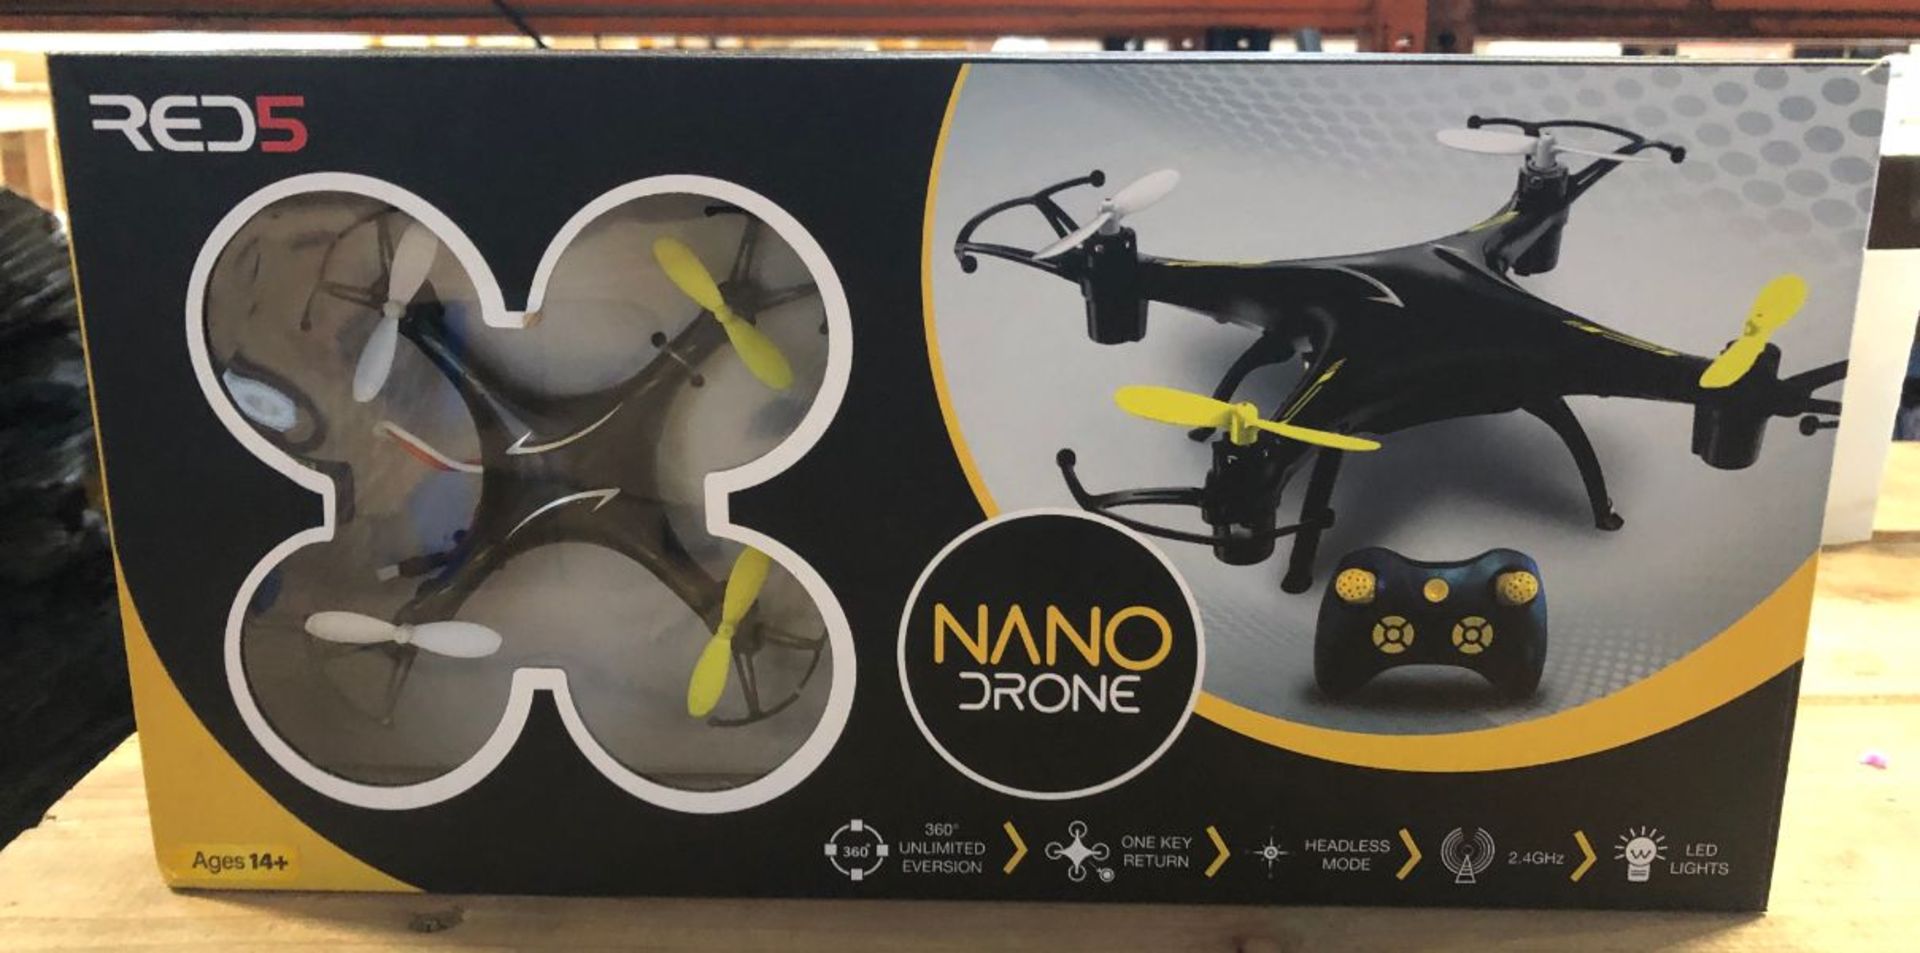 12 X NANO DRONES - COLOURS VARY / COMBINED RRP £180.00 / UNTESTED CUSTOMER RETURNS